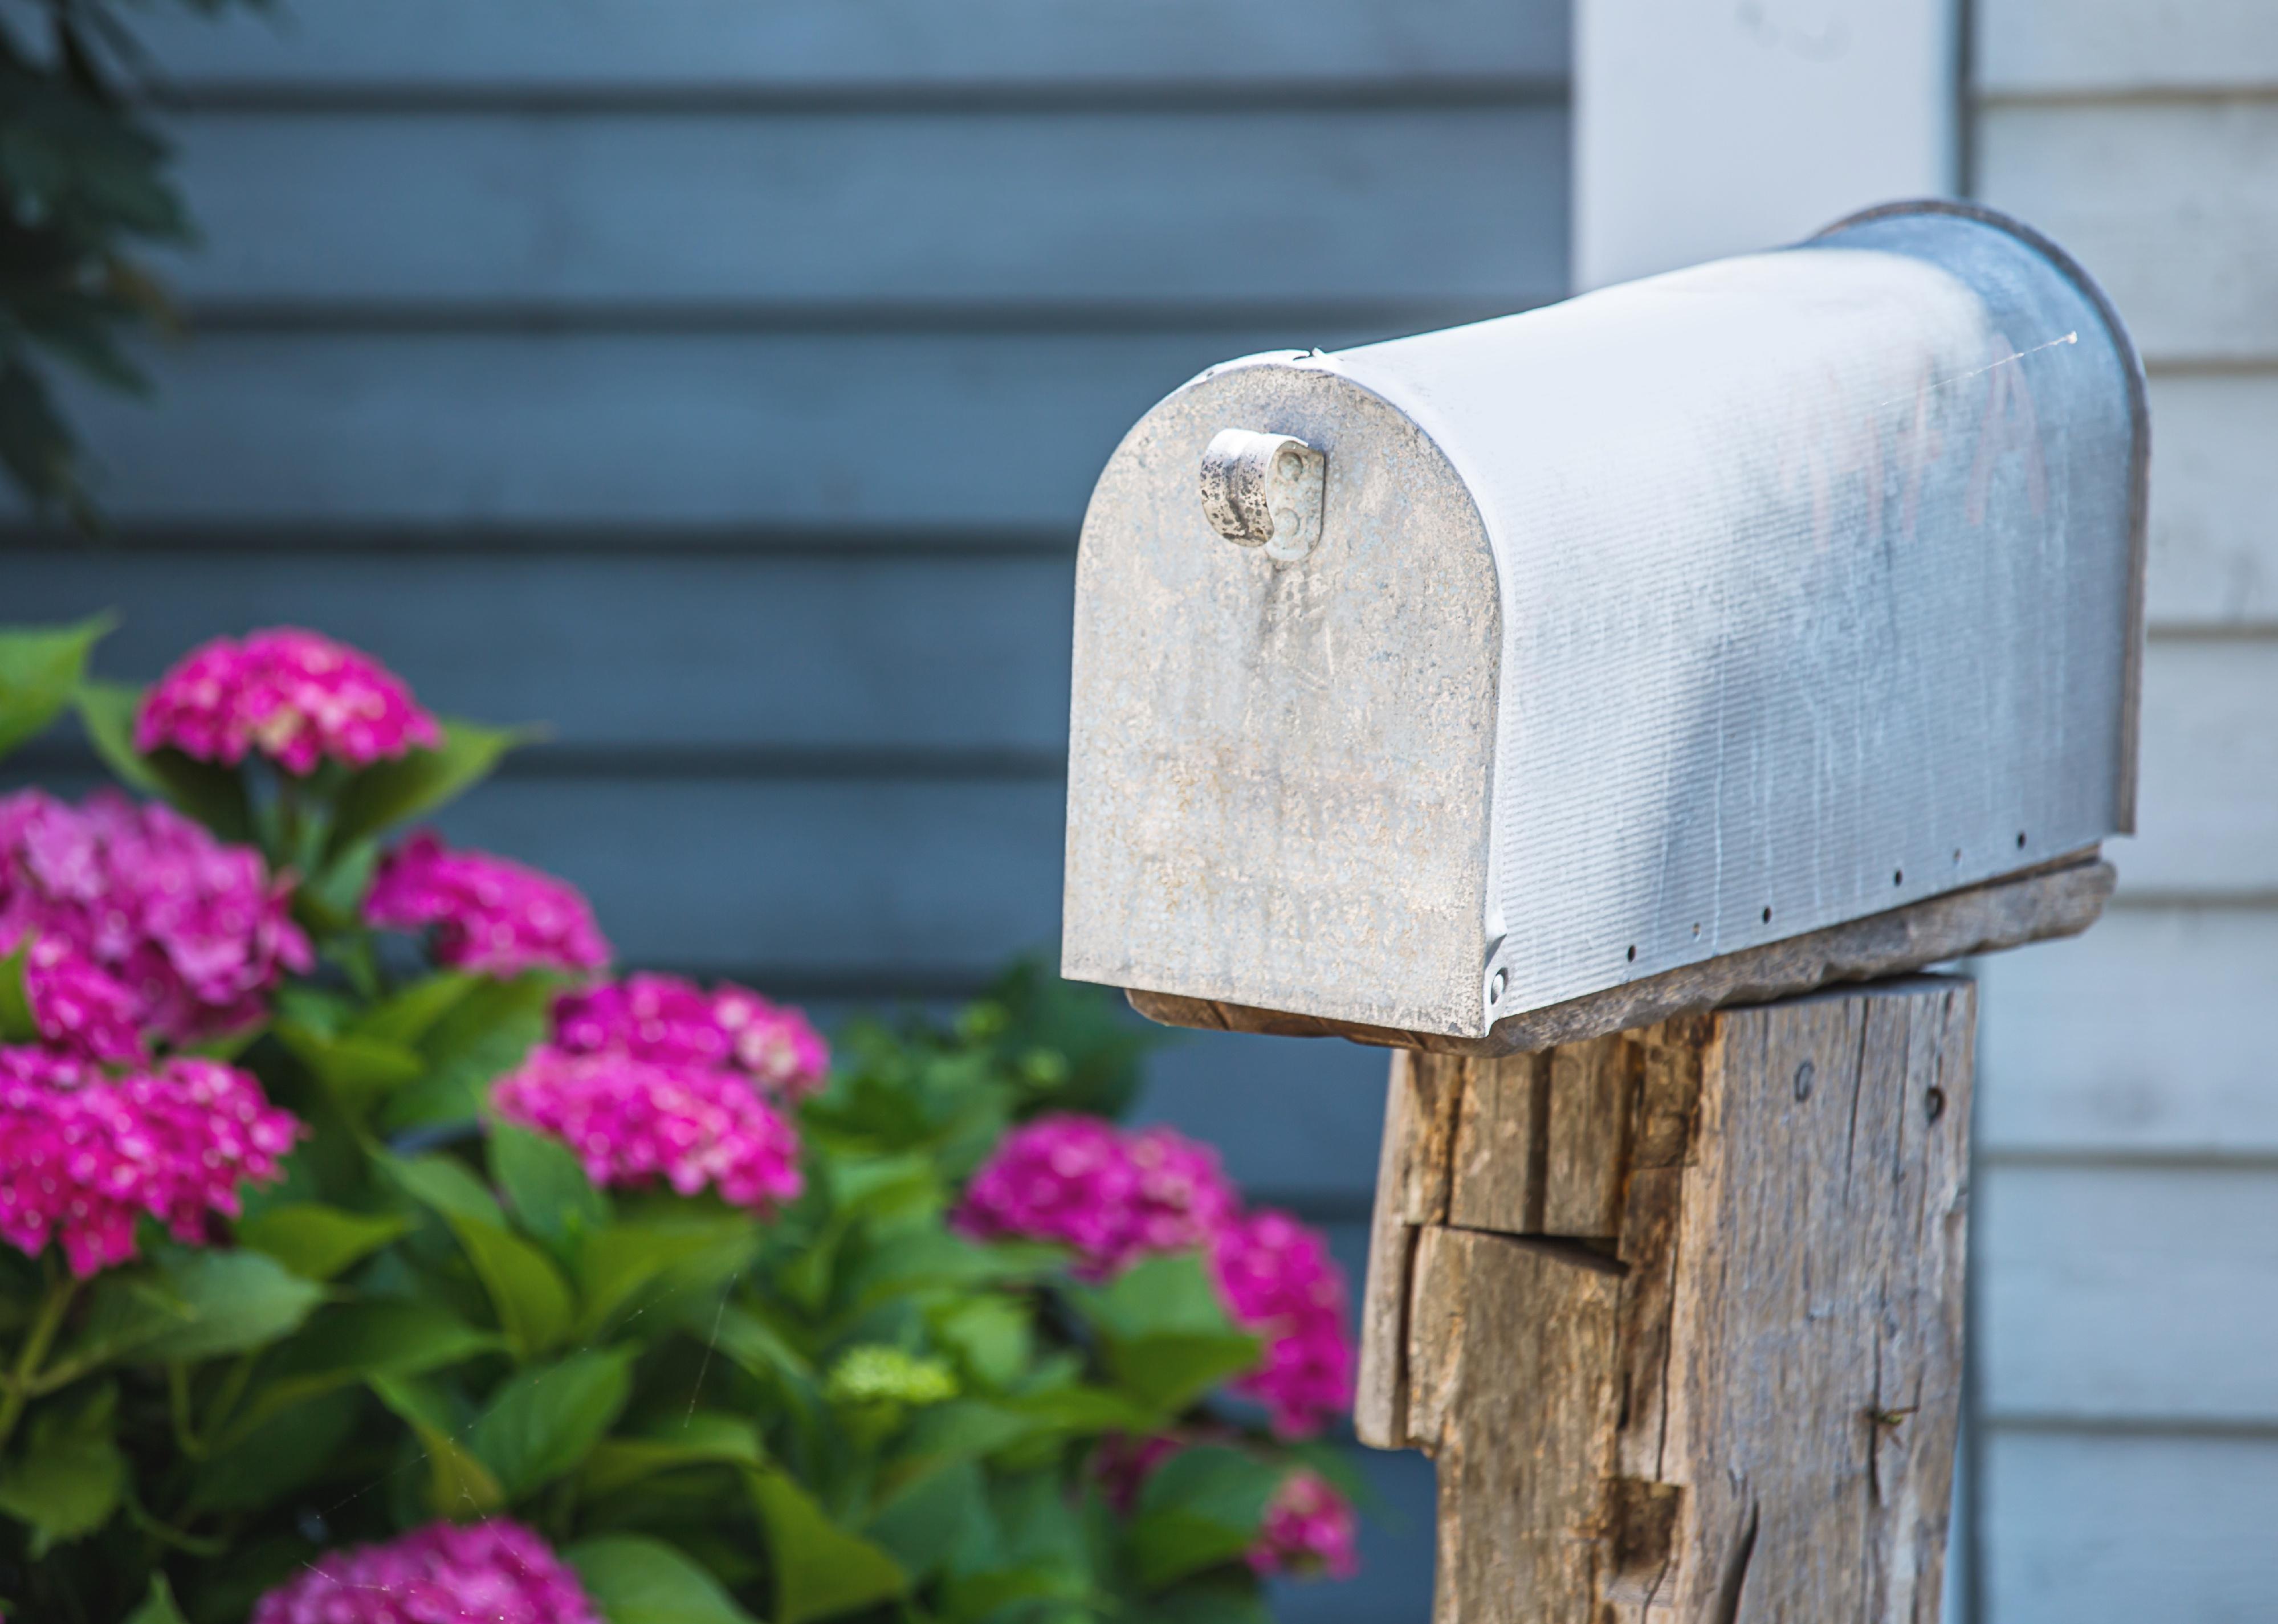 A metal mailbox on a rustic wooden pole and pink flowers.